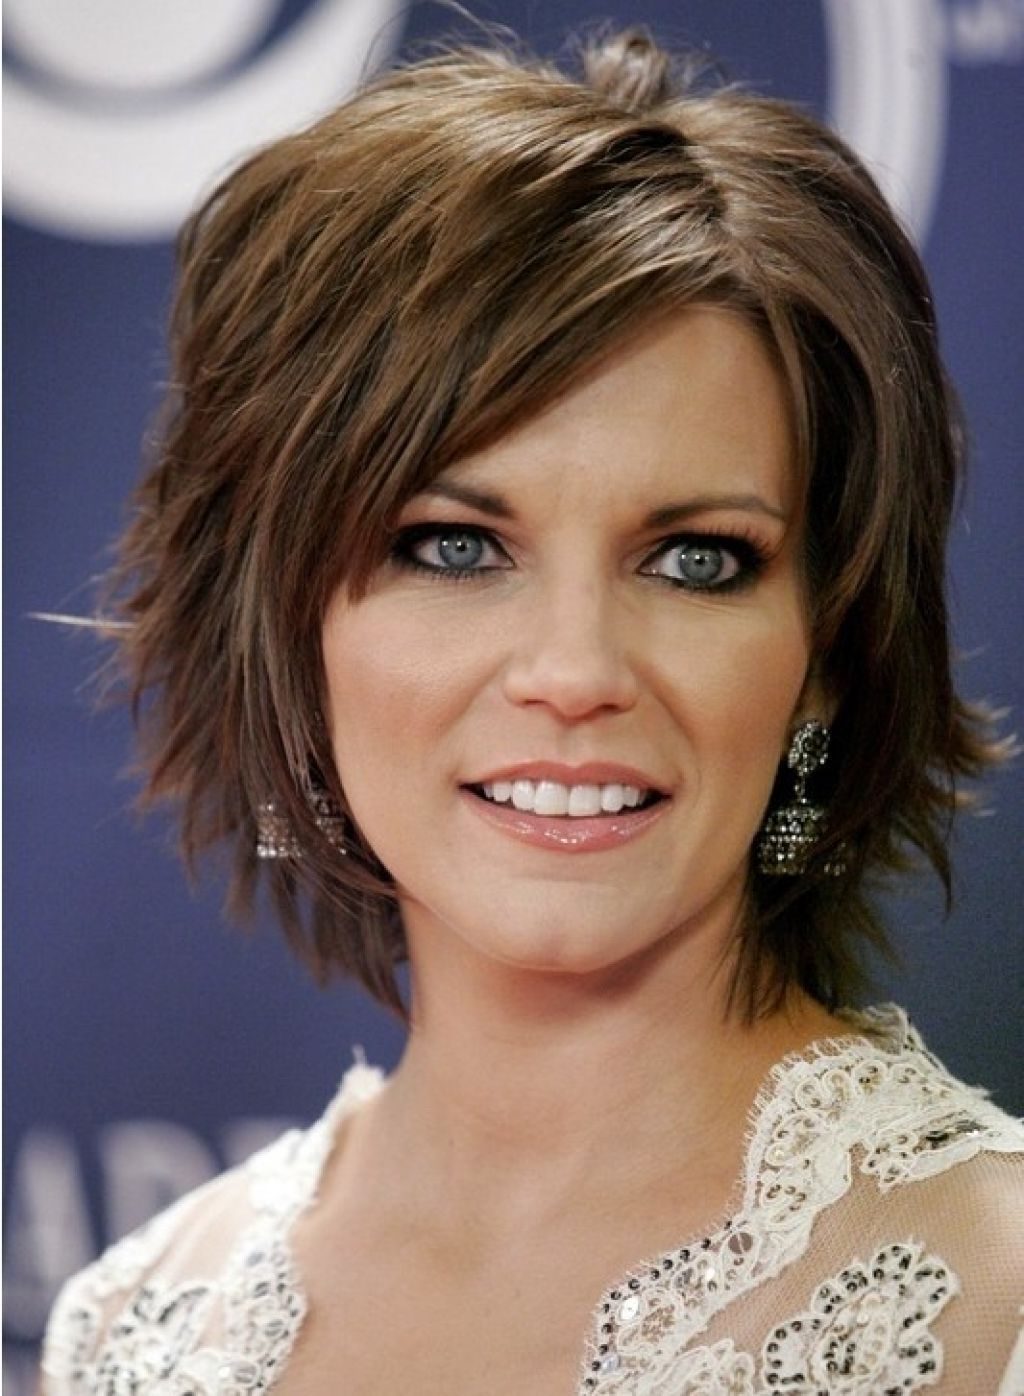 20+ Best Short Hairstyles With Layers | Popular Short Hairstyles Pertaining To Short Haircuts For Thick Hair With Bangs (View 22 of 25)